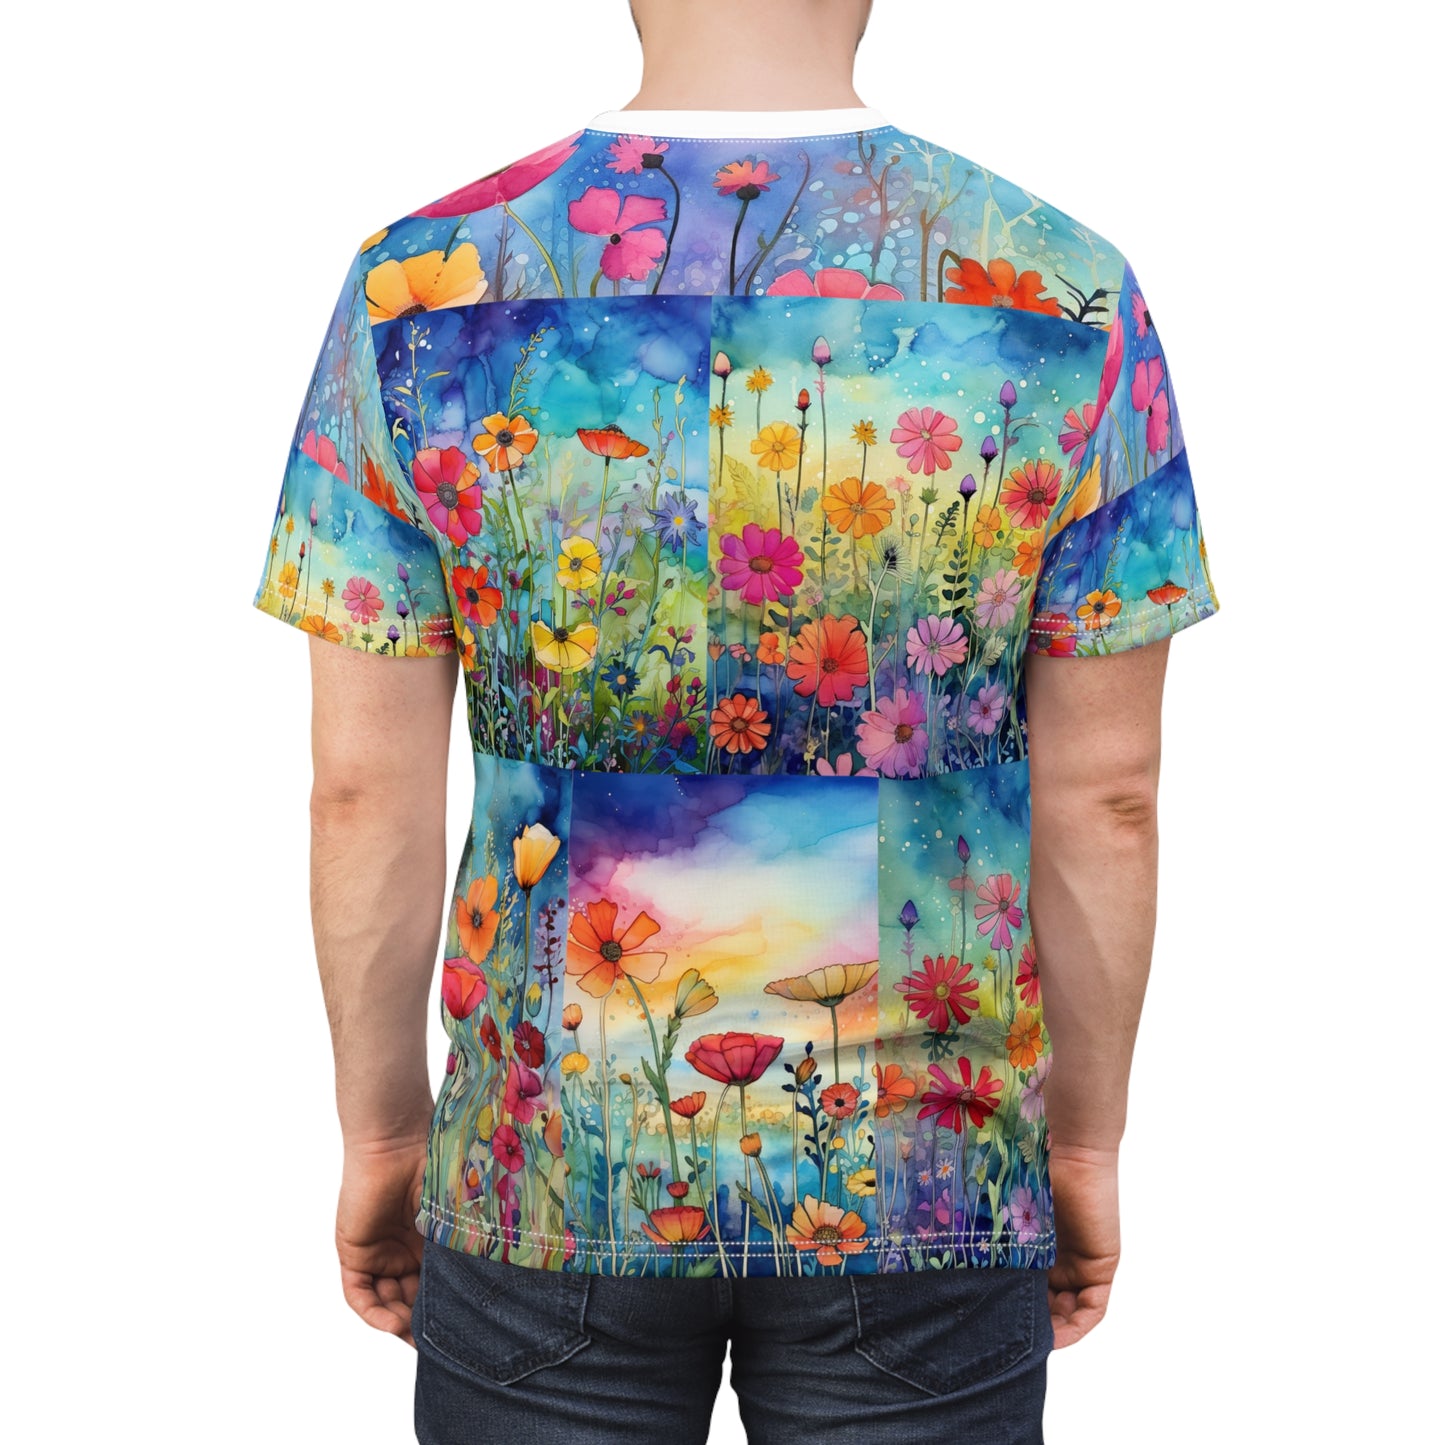 Floral Design, Wild Flowers Filed, Abstract Style, Unisex Tee